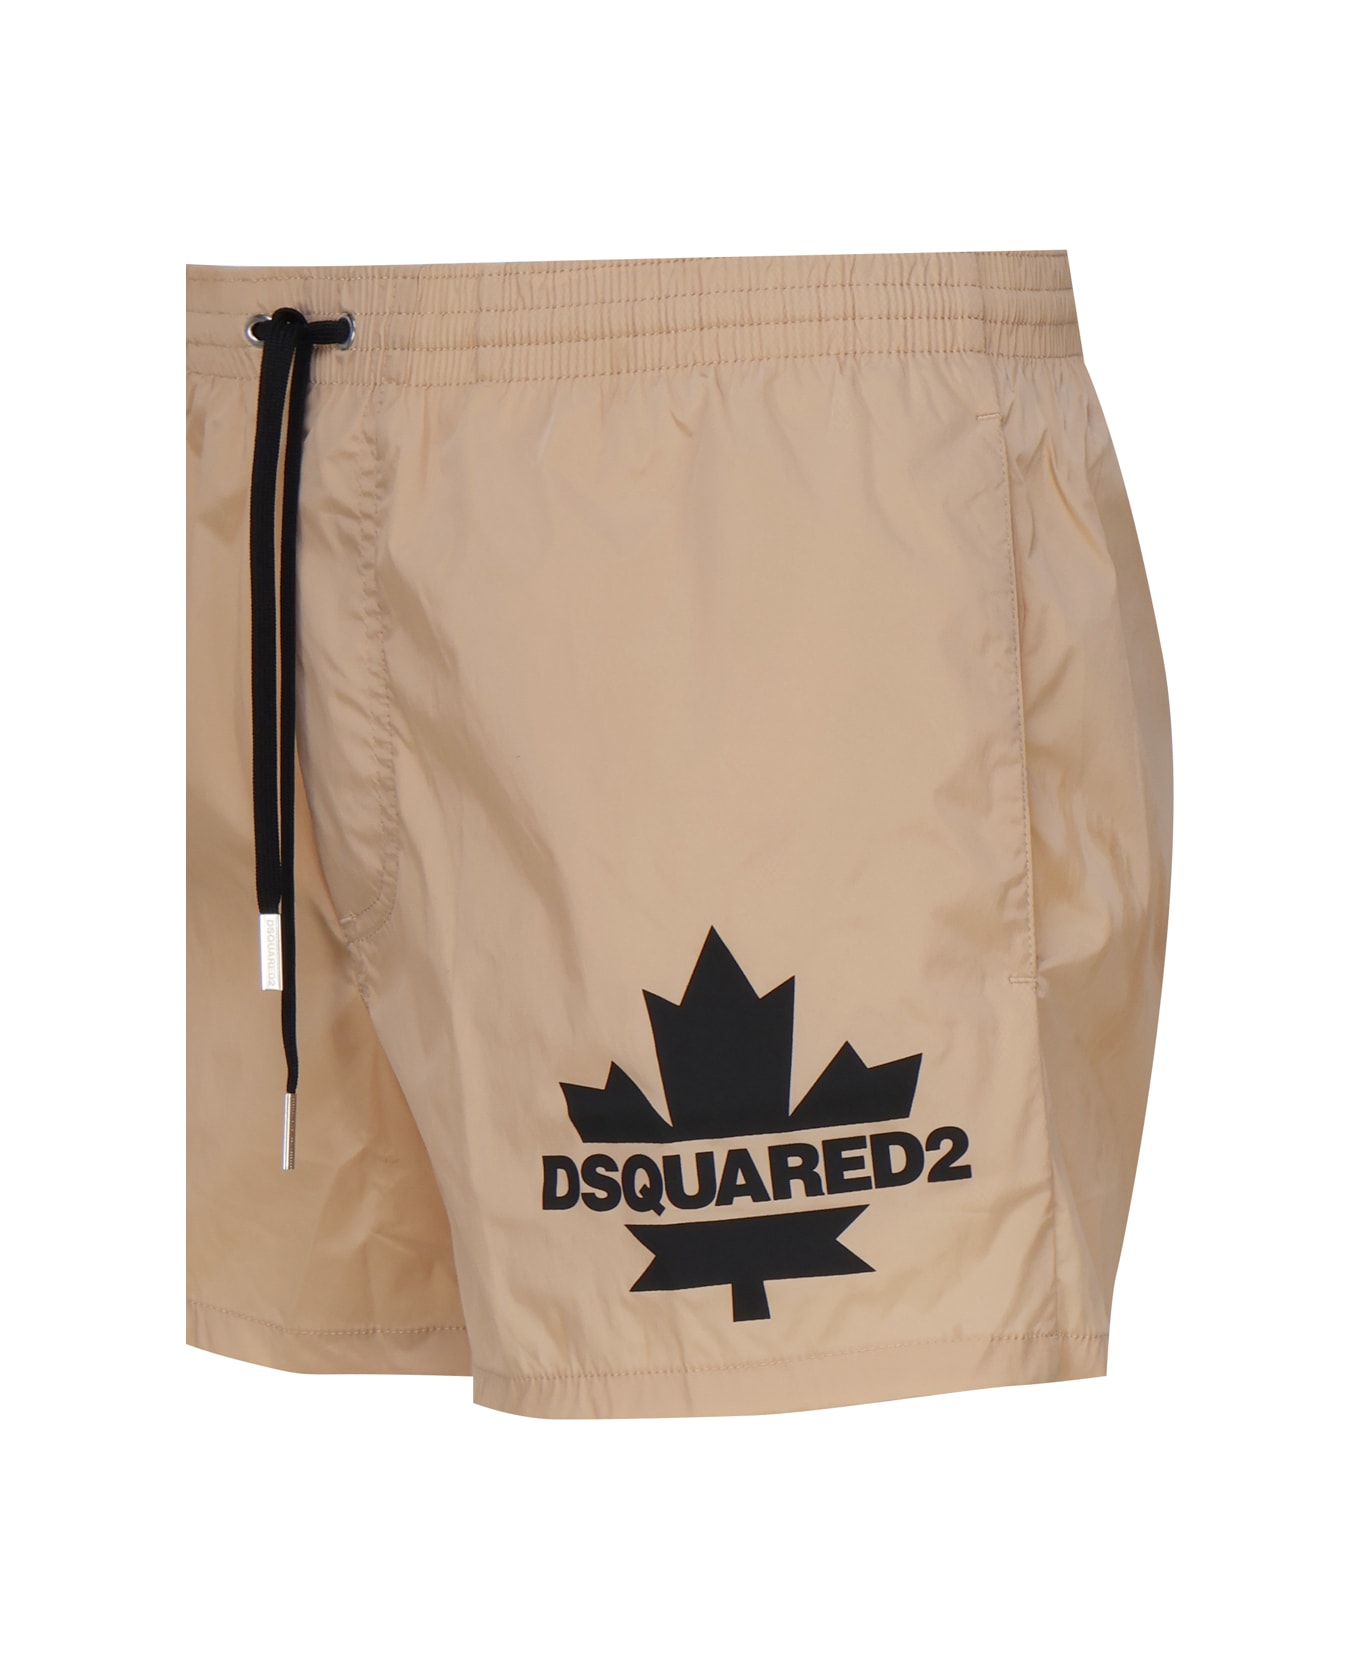 Dsquared2 Swim Shorts With Contrasting Color Logo - Beige Black